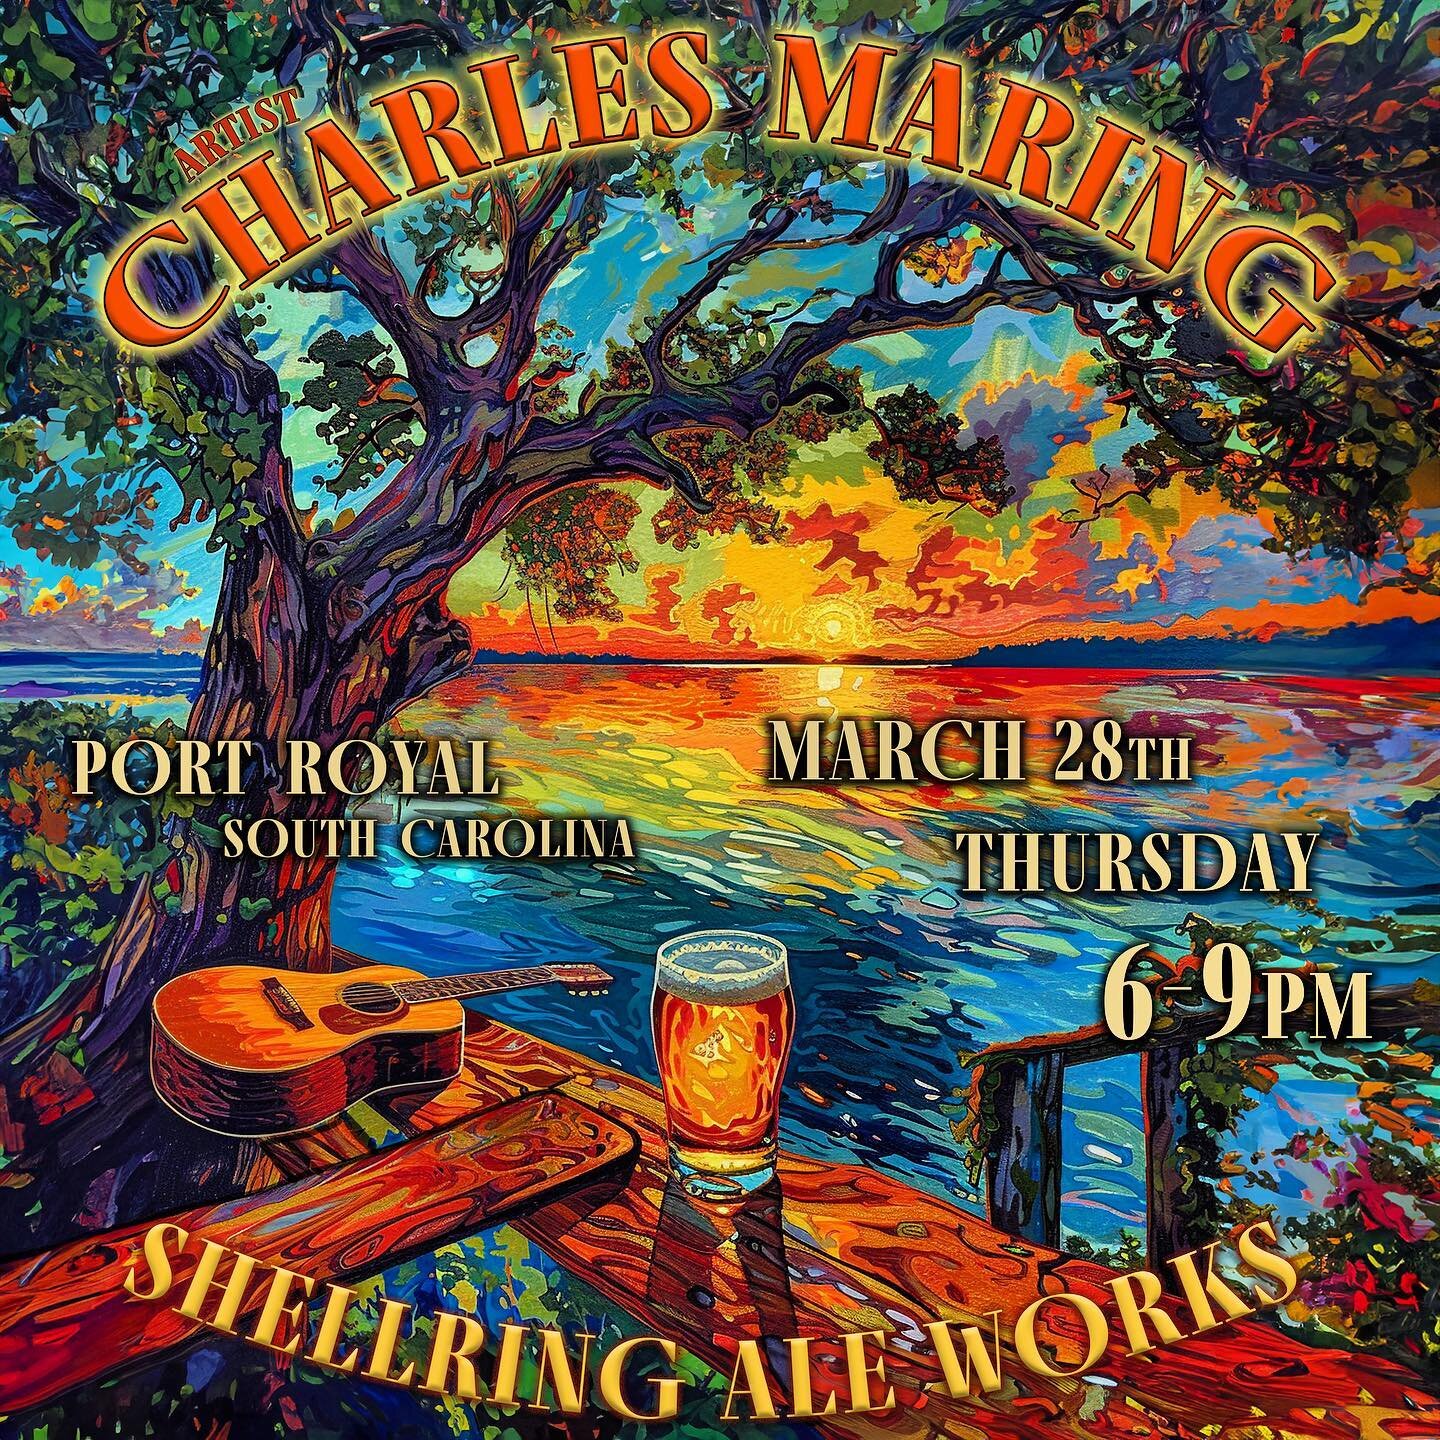 Thursday I&rsquo;ll be rock&rsquo;n out solo at @shellring_aleworks in #portroyal Home of great beers 🍺 delicious food and epic sunsets ☀️ Come on out and chill with #livemusic 🎶 #portroyalsc #songwriter #musicians #musiclife #gigposter #concert #c